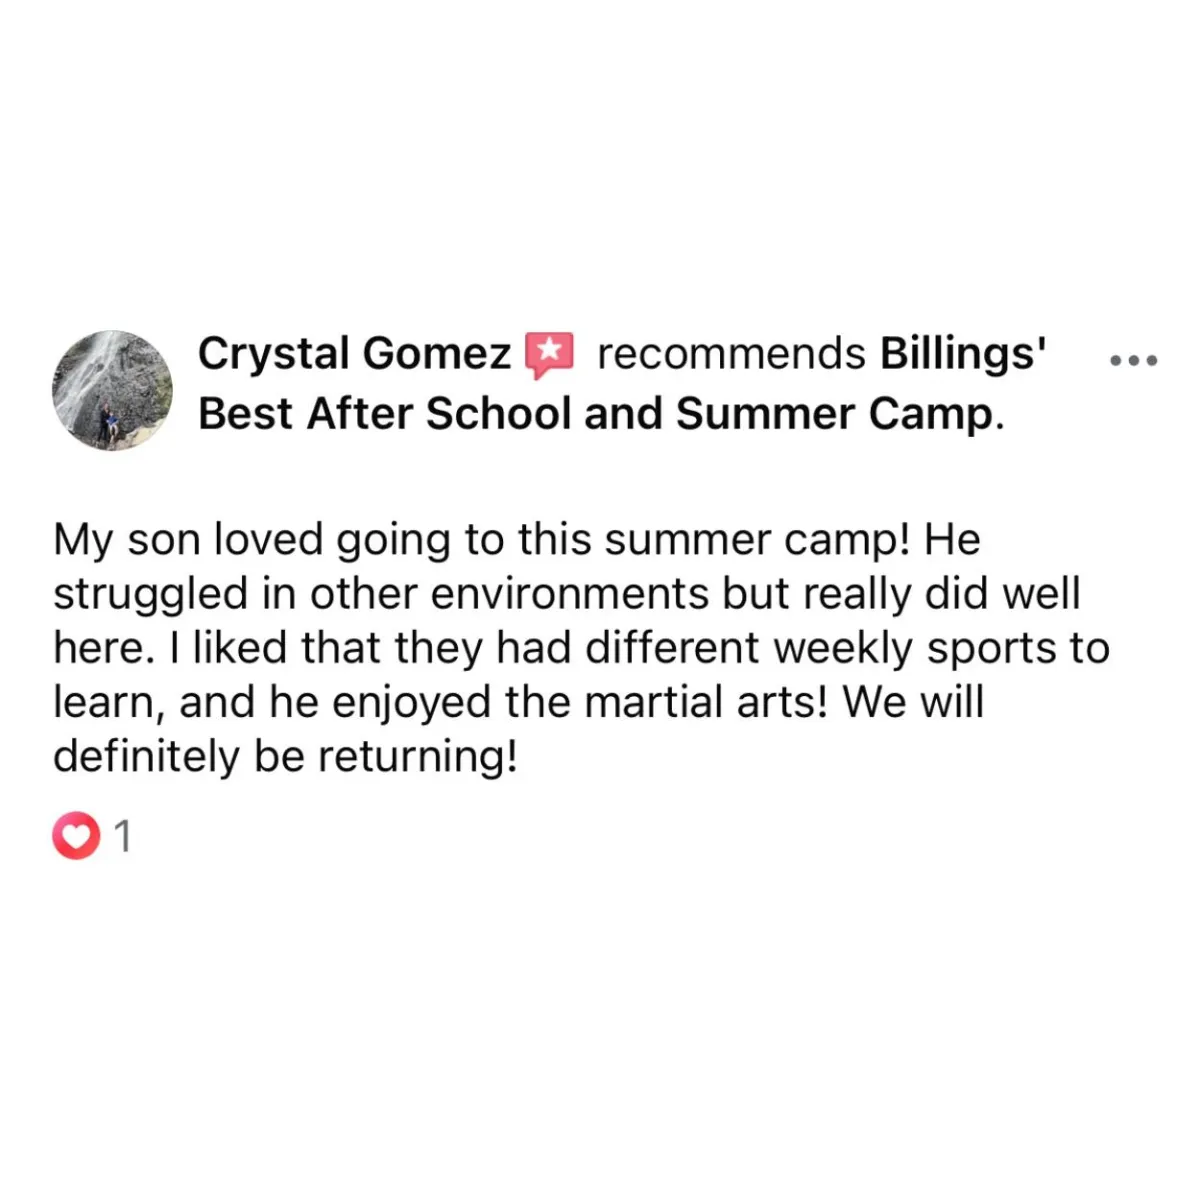 5 Star Reviews For Billings’ Best After School and Summer Camp